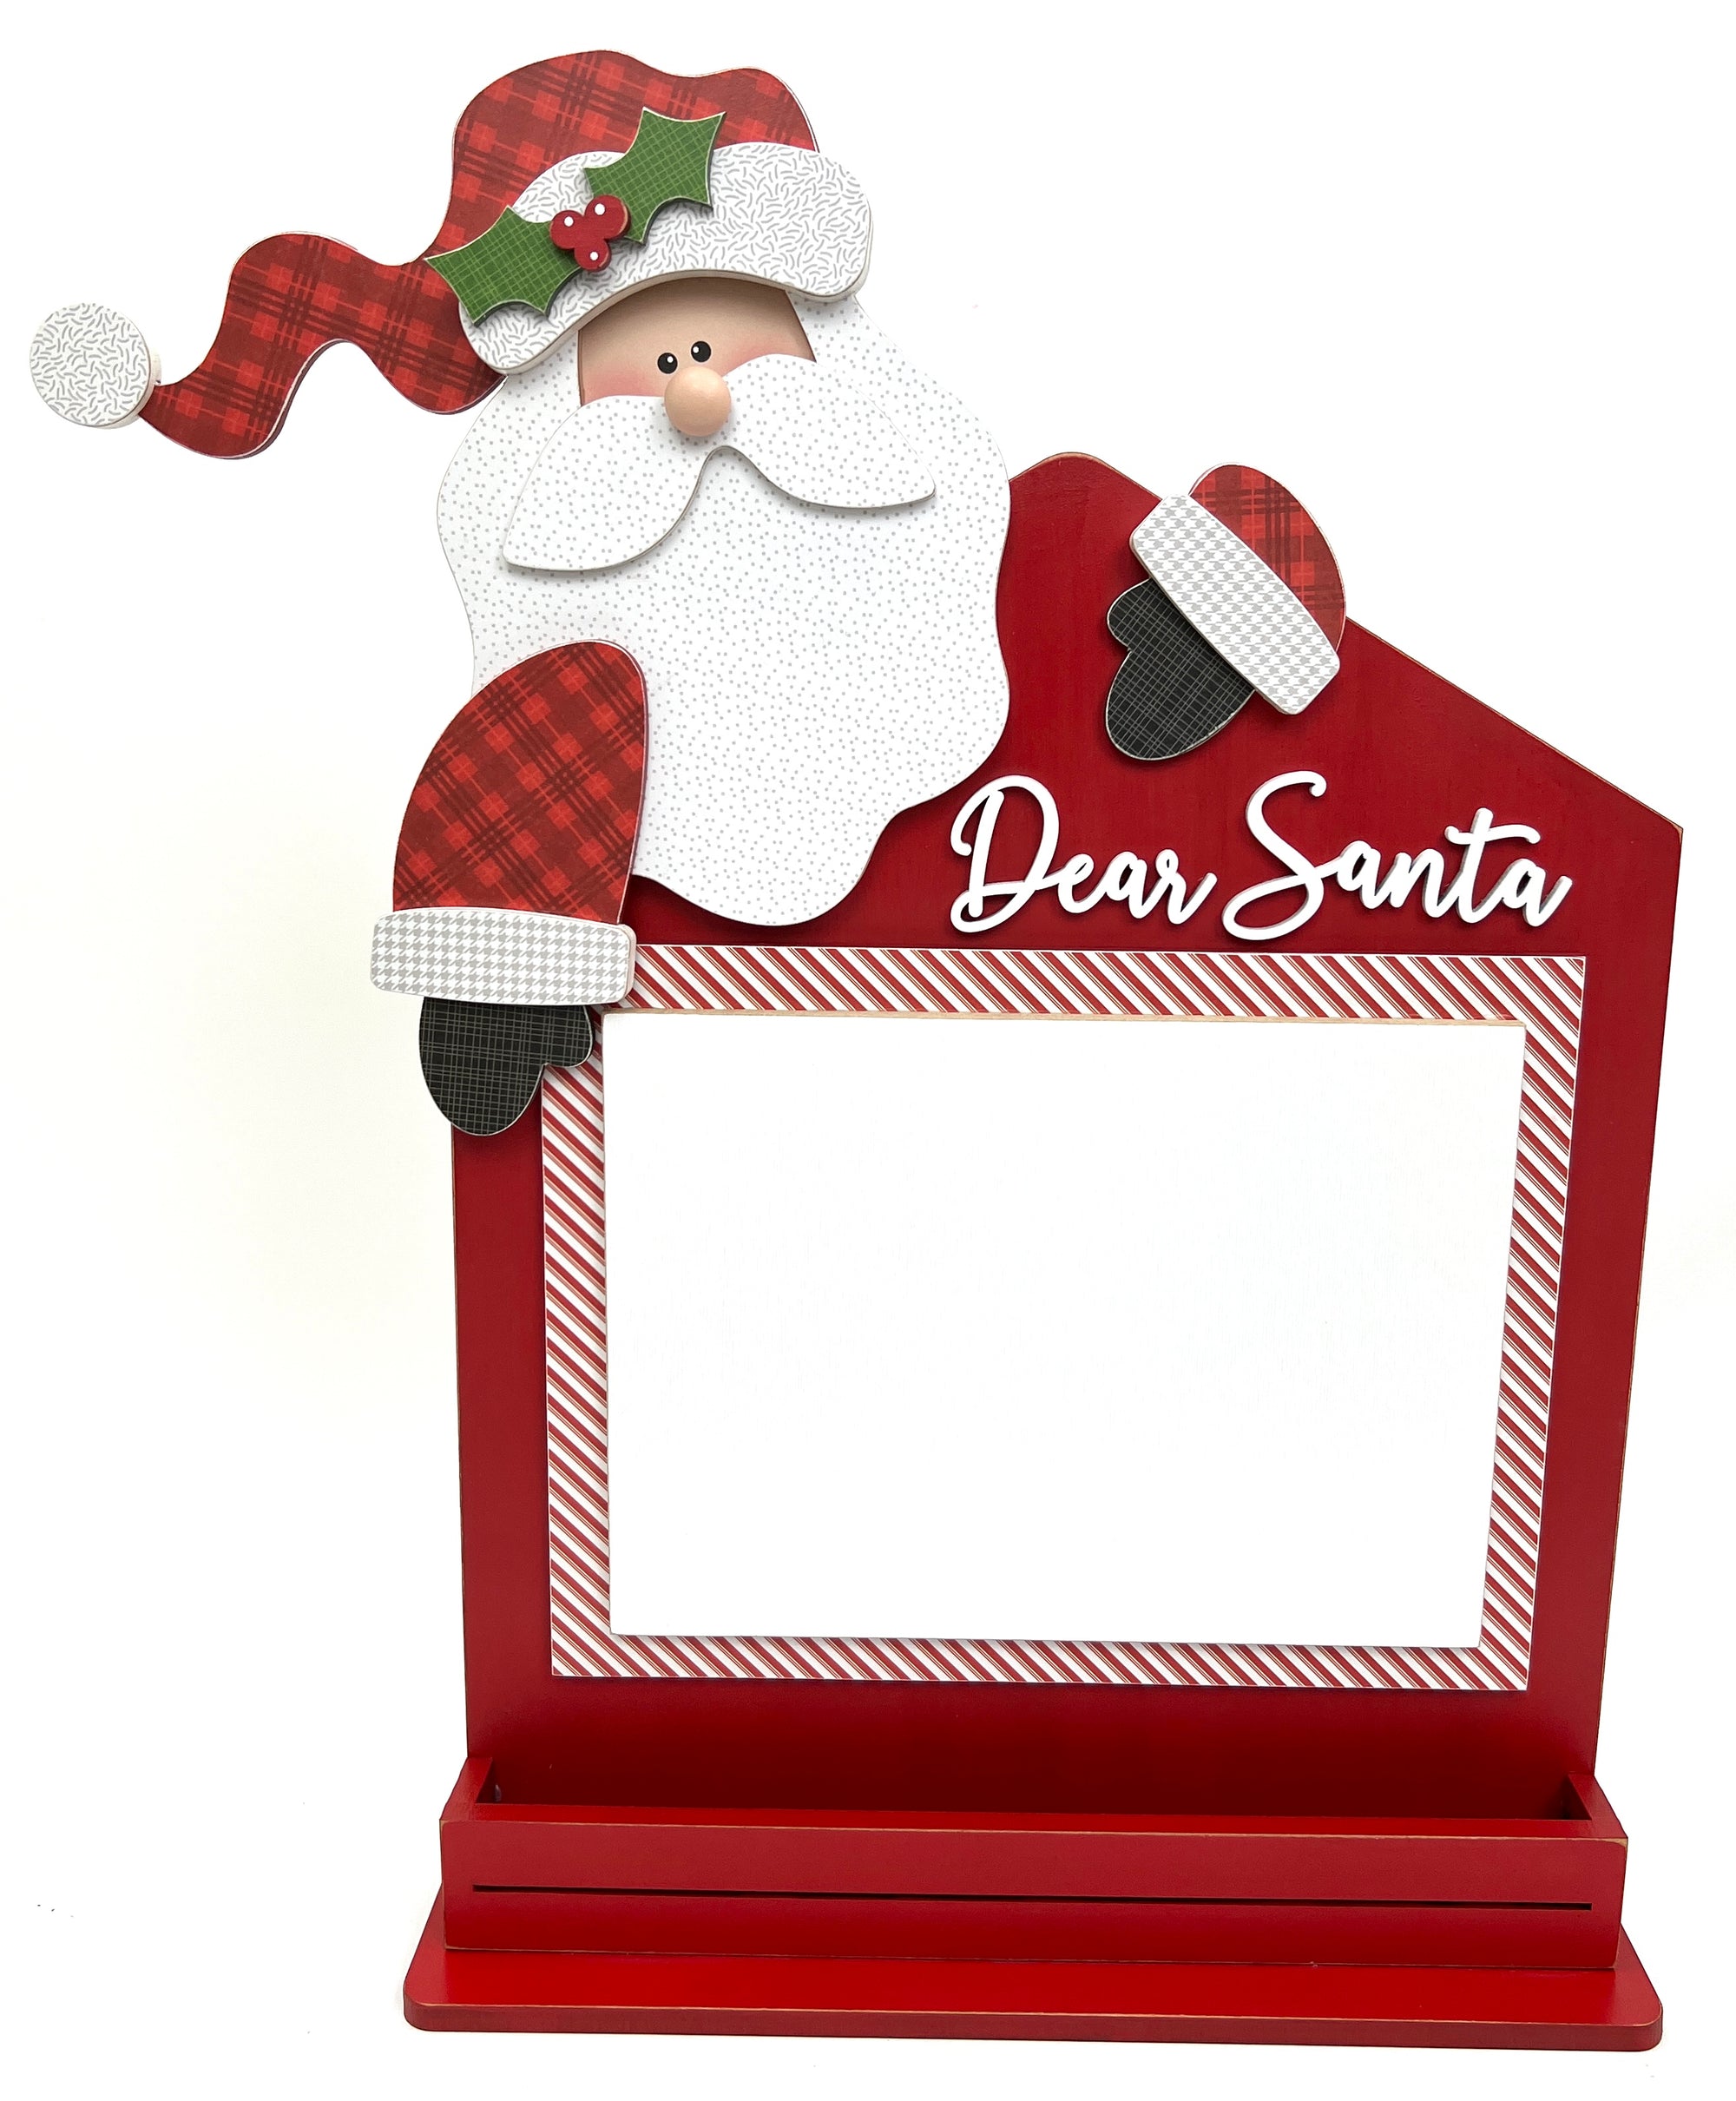 Letters to Santa dry erase board wood decor crafting kit. Santa on top of a letter with a dry erase board for kids to write letters to santa.